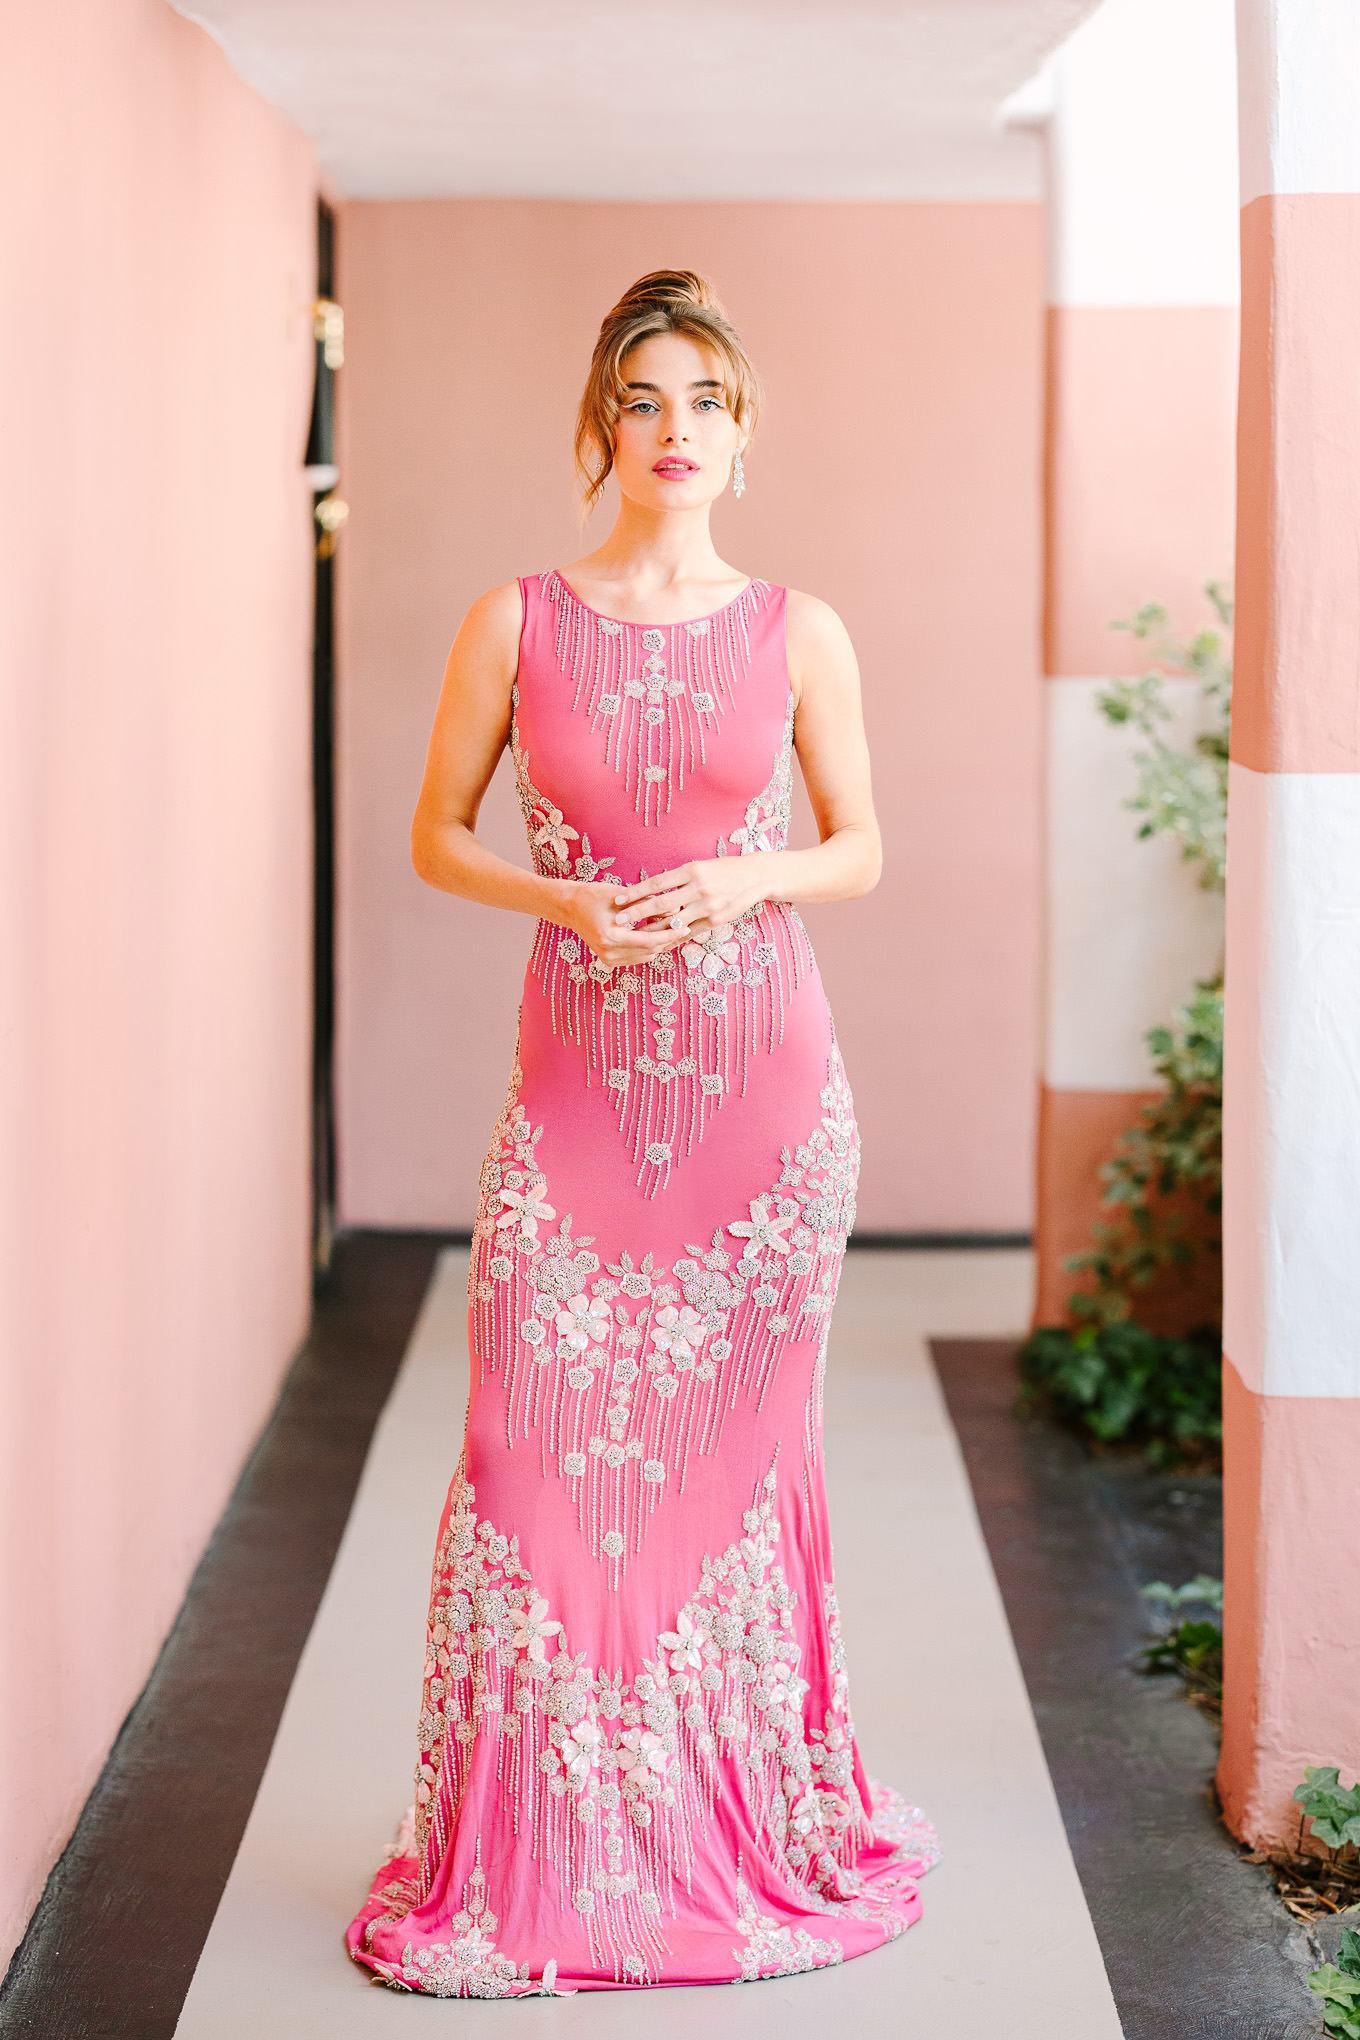 Naeem Khan pink gown in pink Sands Hotel hallway | Kindred Presets x Mary Costa Photography Sands Hotel Ad Campaign | Colorful Palm Springs wedding photography | #palmspringsphotographer #lightroompresets #sandshotel #pinkhotel   Source: Mary Costa Photography | Los Angeles